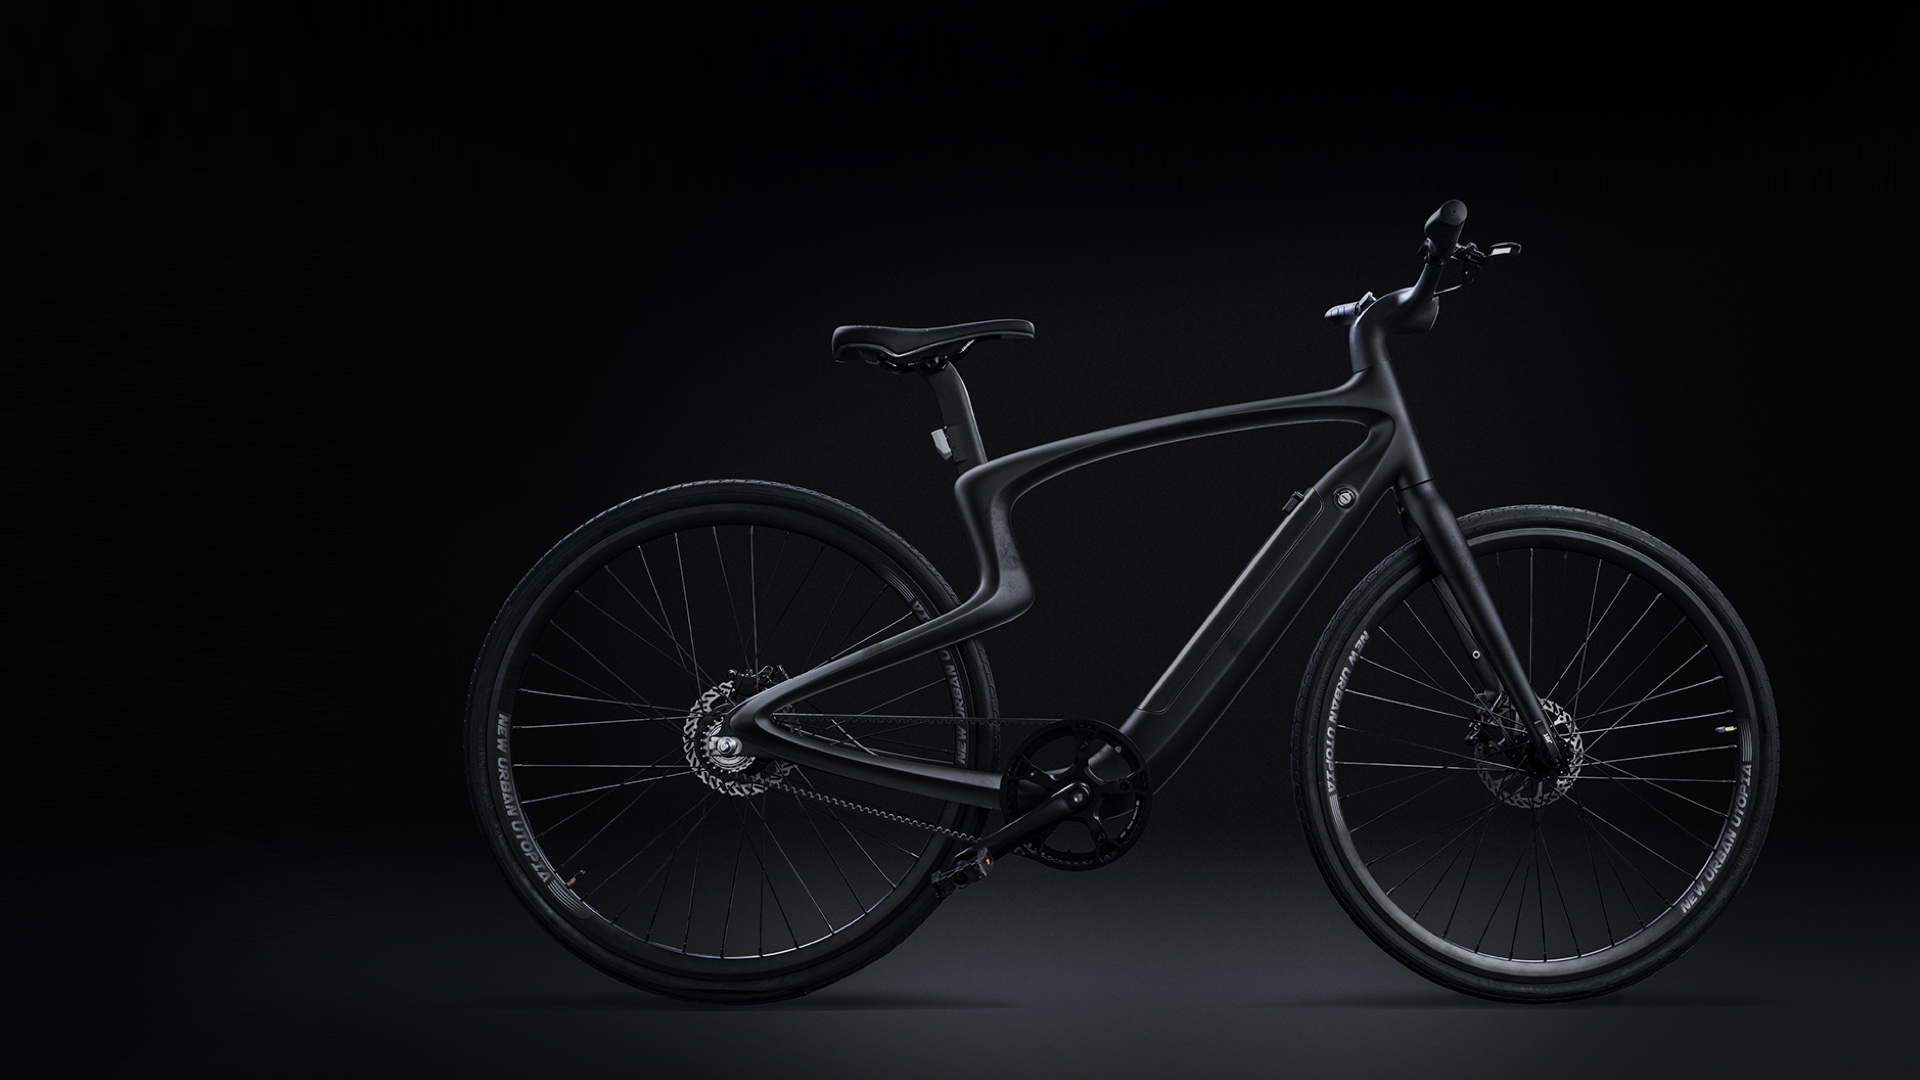 Design and build the Urtopia carbon fiber E-Bike with sales exceeding 4 million US dollars